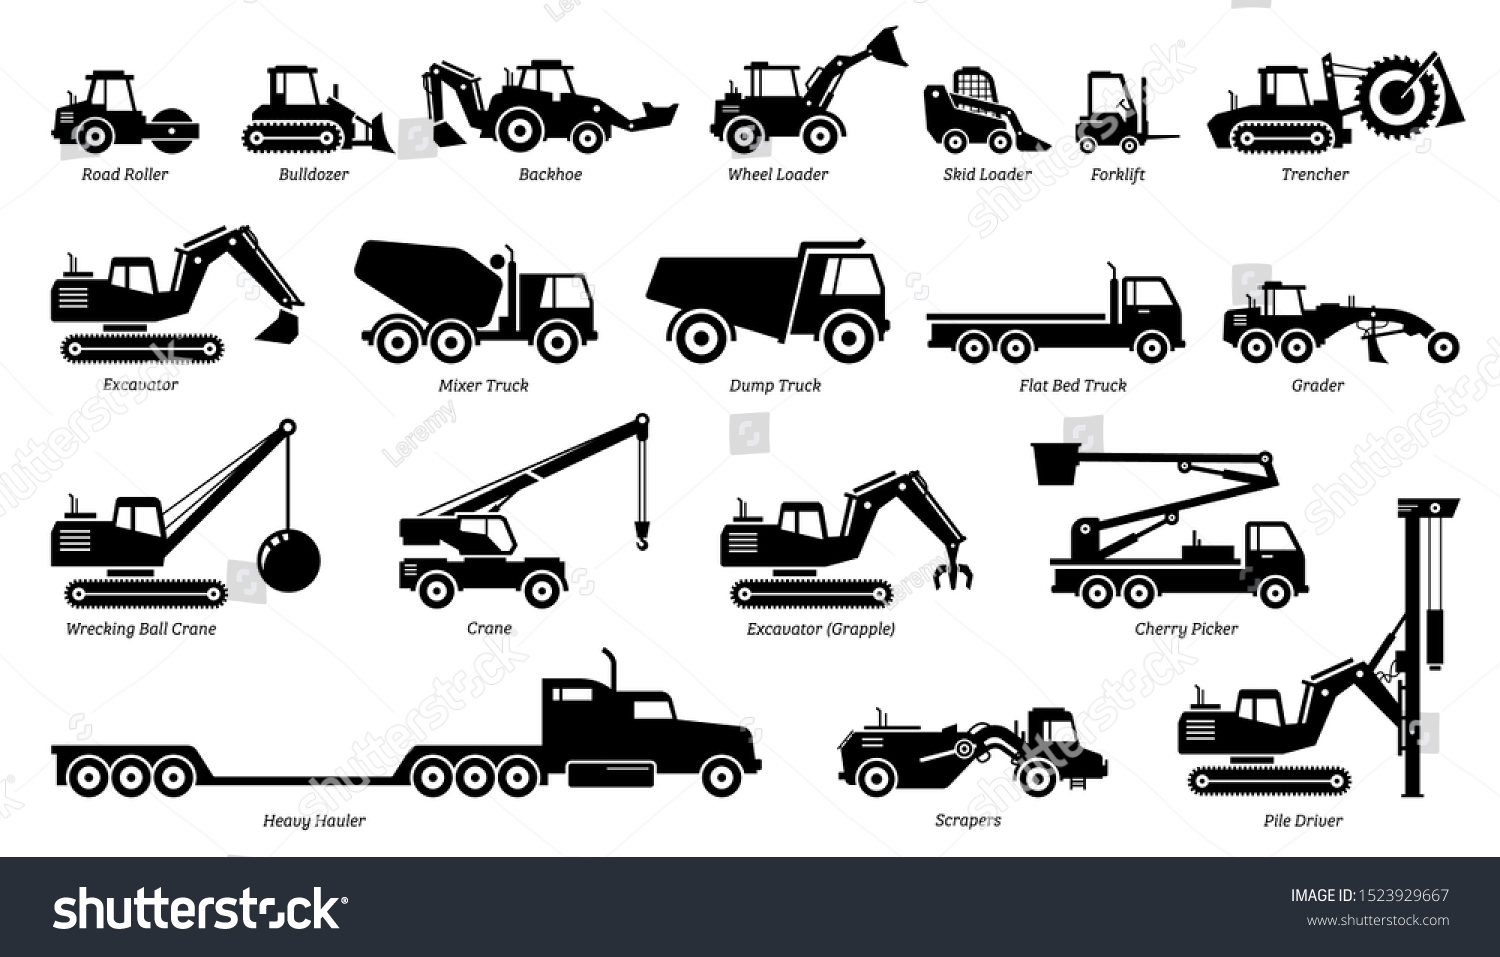 SVG of List of construction vehicles, tractors, and heavy machinery icons. Sideview artwork of construction and industrial vehicles, road roller, bulldozer, backhoe, excavator, dump truck, and crane. svg